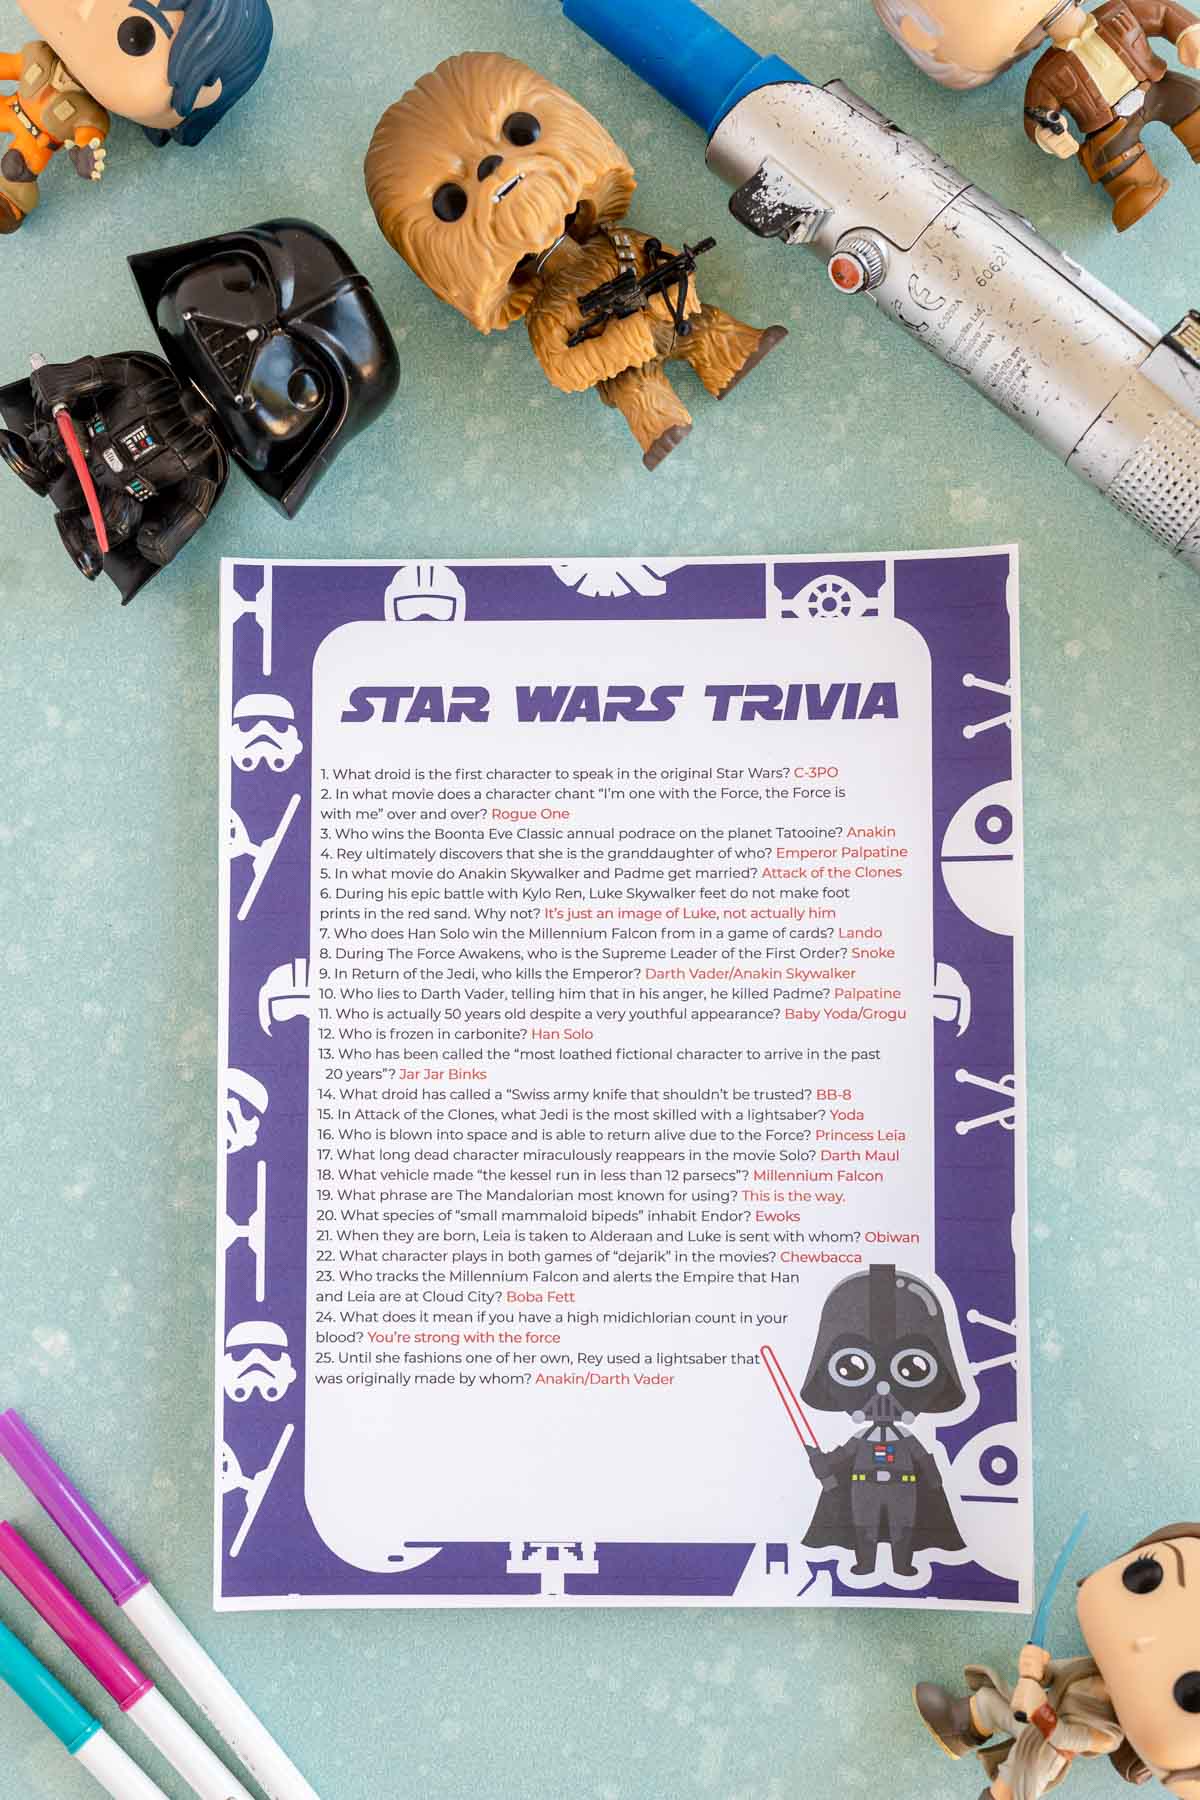 Star Wars trivia questions with answers